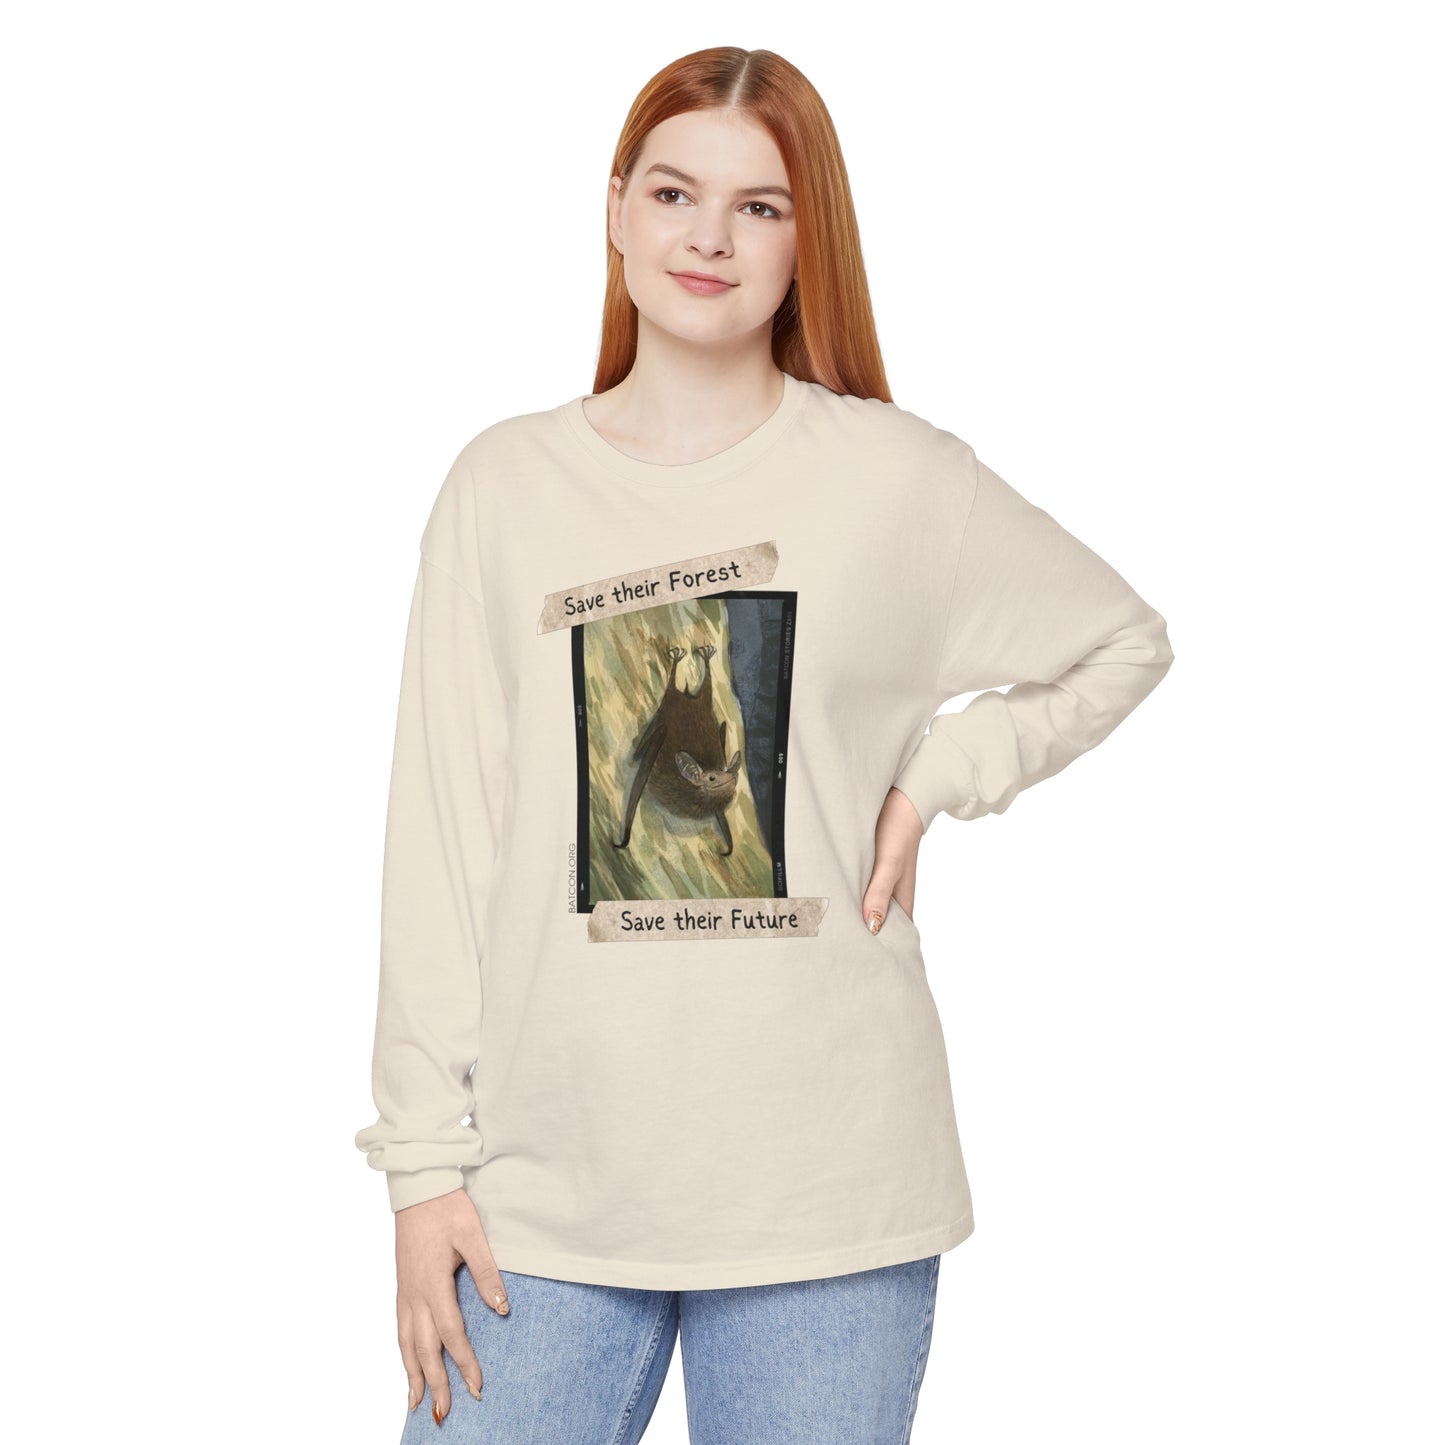 Save their Forest Taped Photo - Unisex Long Sleeve T-Shirt